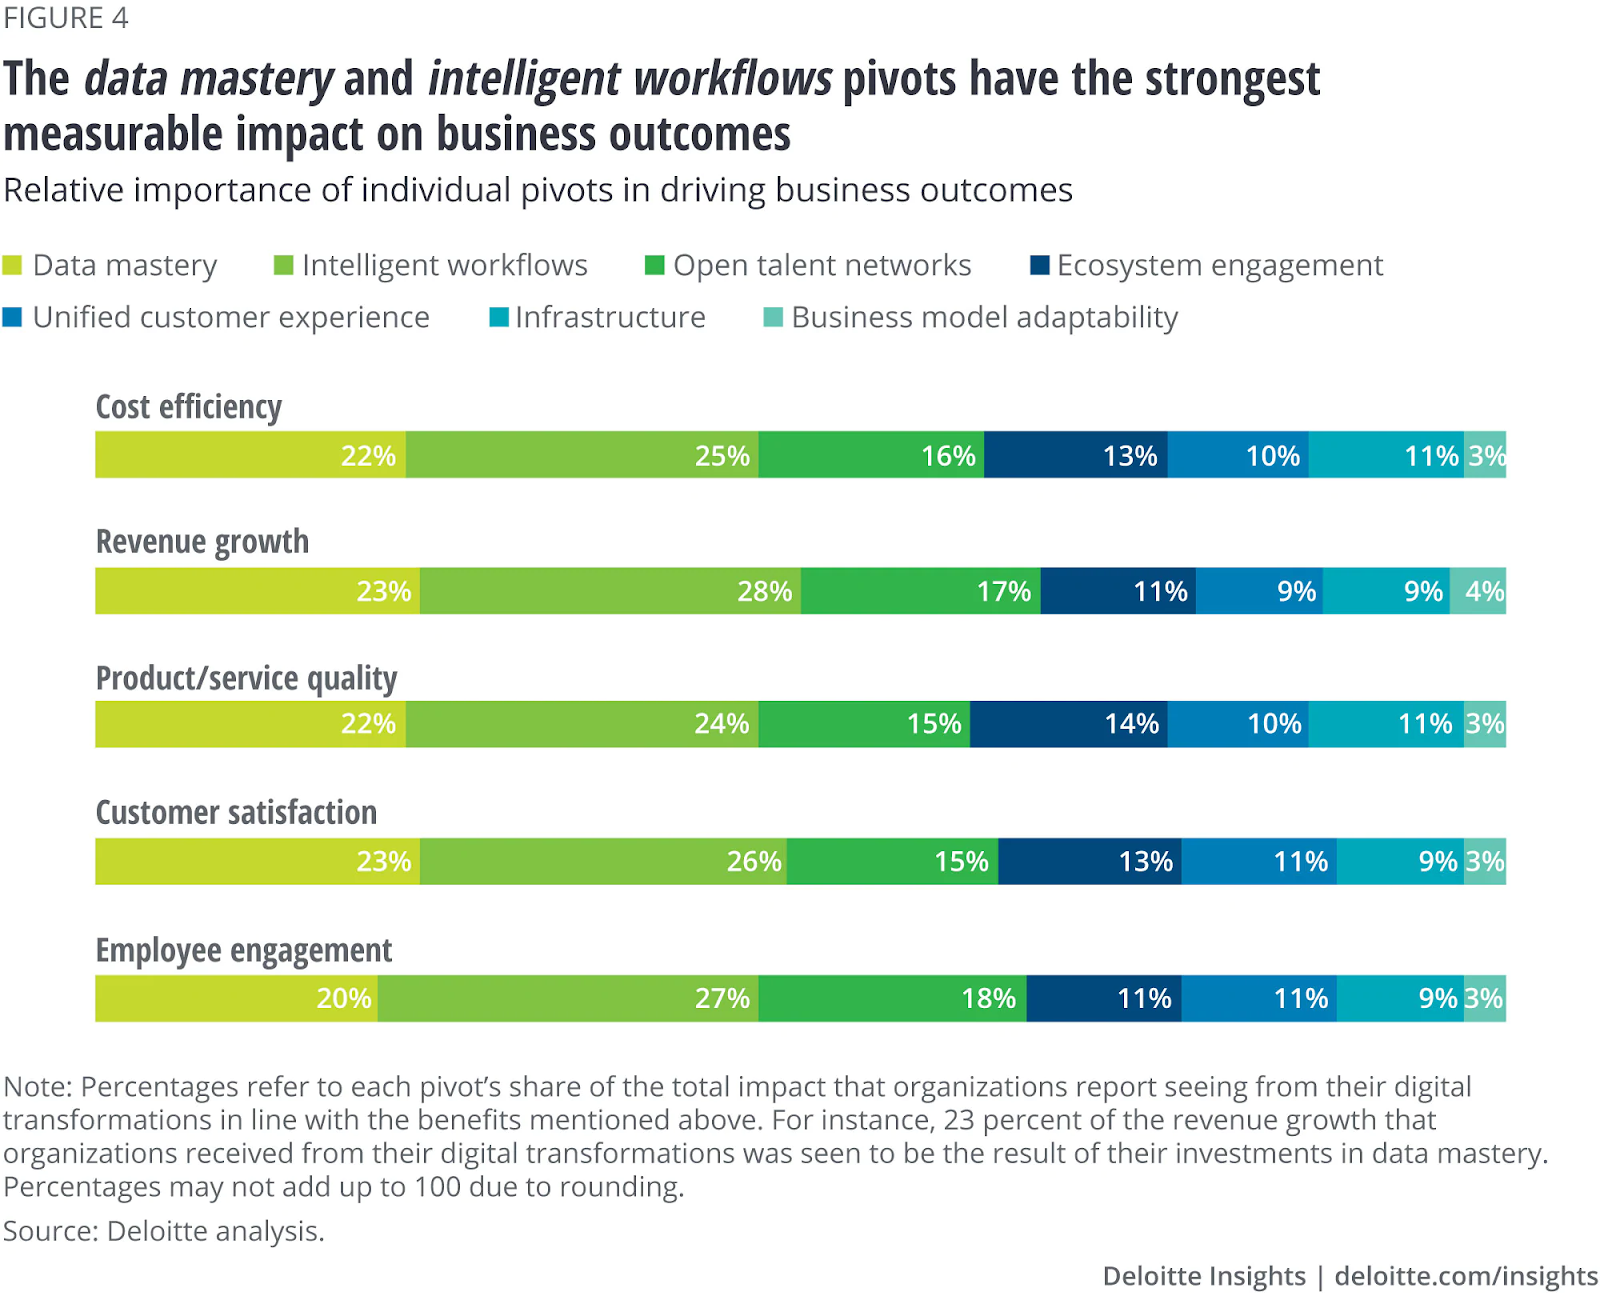 The data mastery and intelligent workflows pivots have the strongest measurable impact on business outcomes